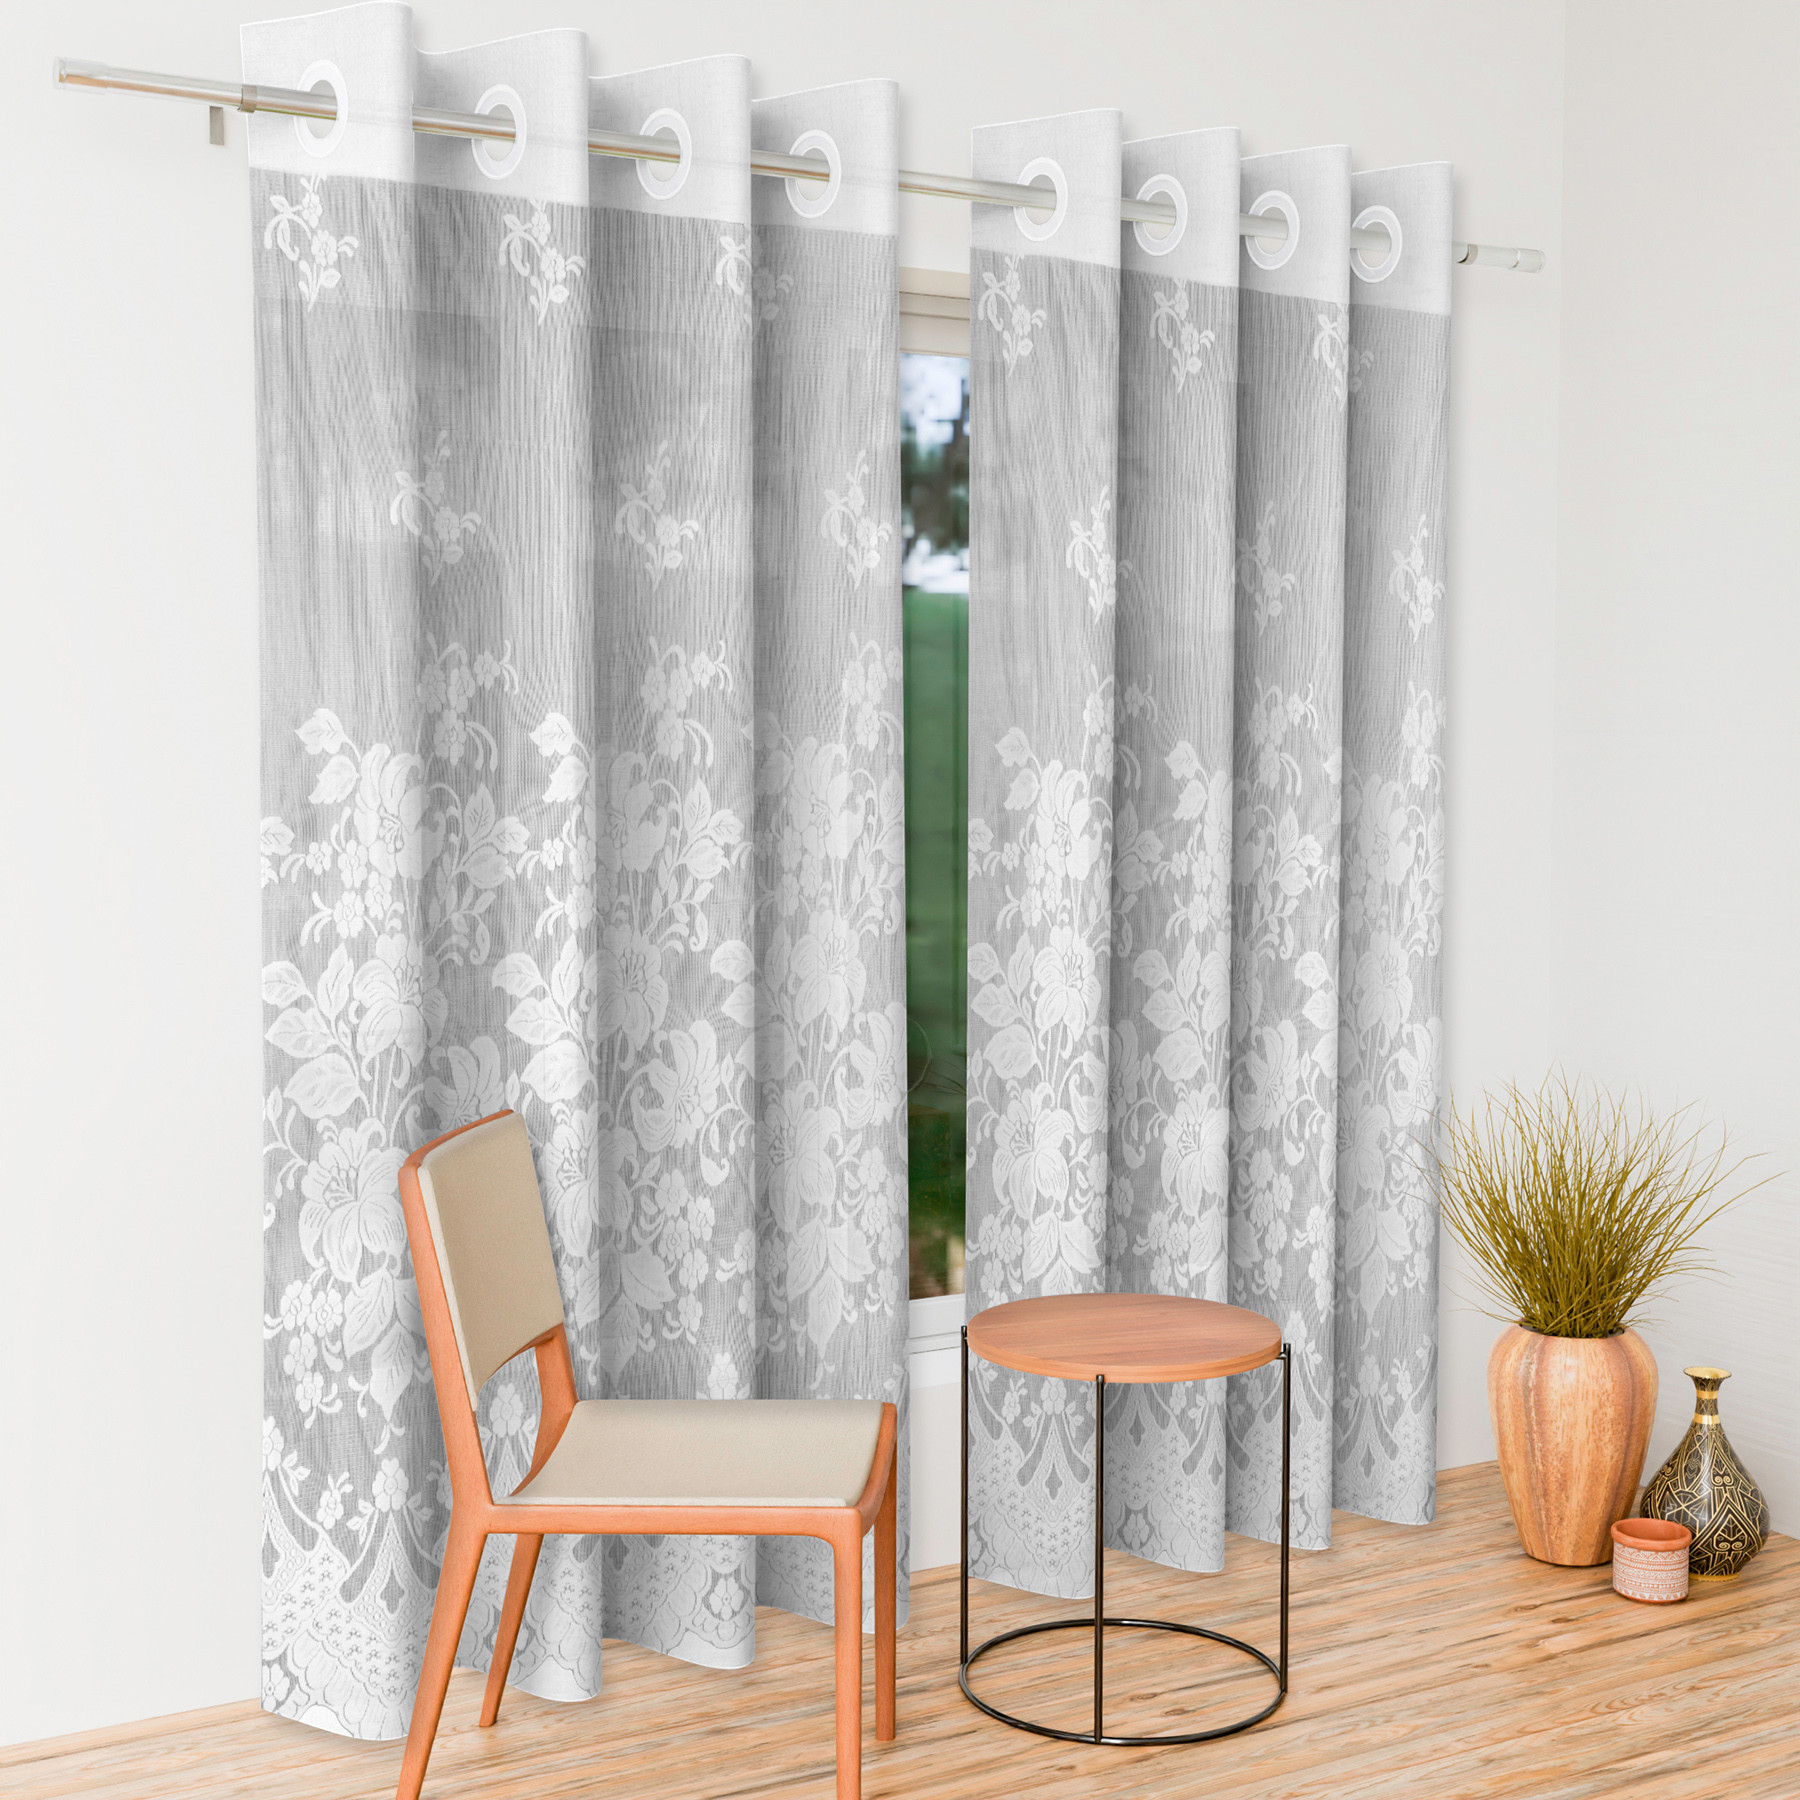 Kuber Industries Door Curtain | Darkening Door Curtains | Premium Drapes for Bedroom | Sheer Curtain with 8 Rings | Parda for Living Room | Net Frill Door Curtain | 7 Ft | SY27 | White